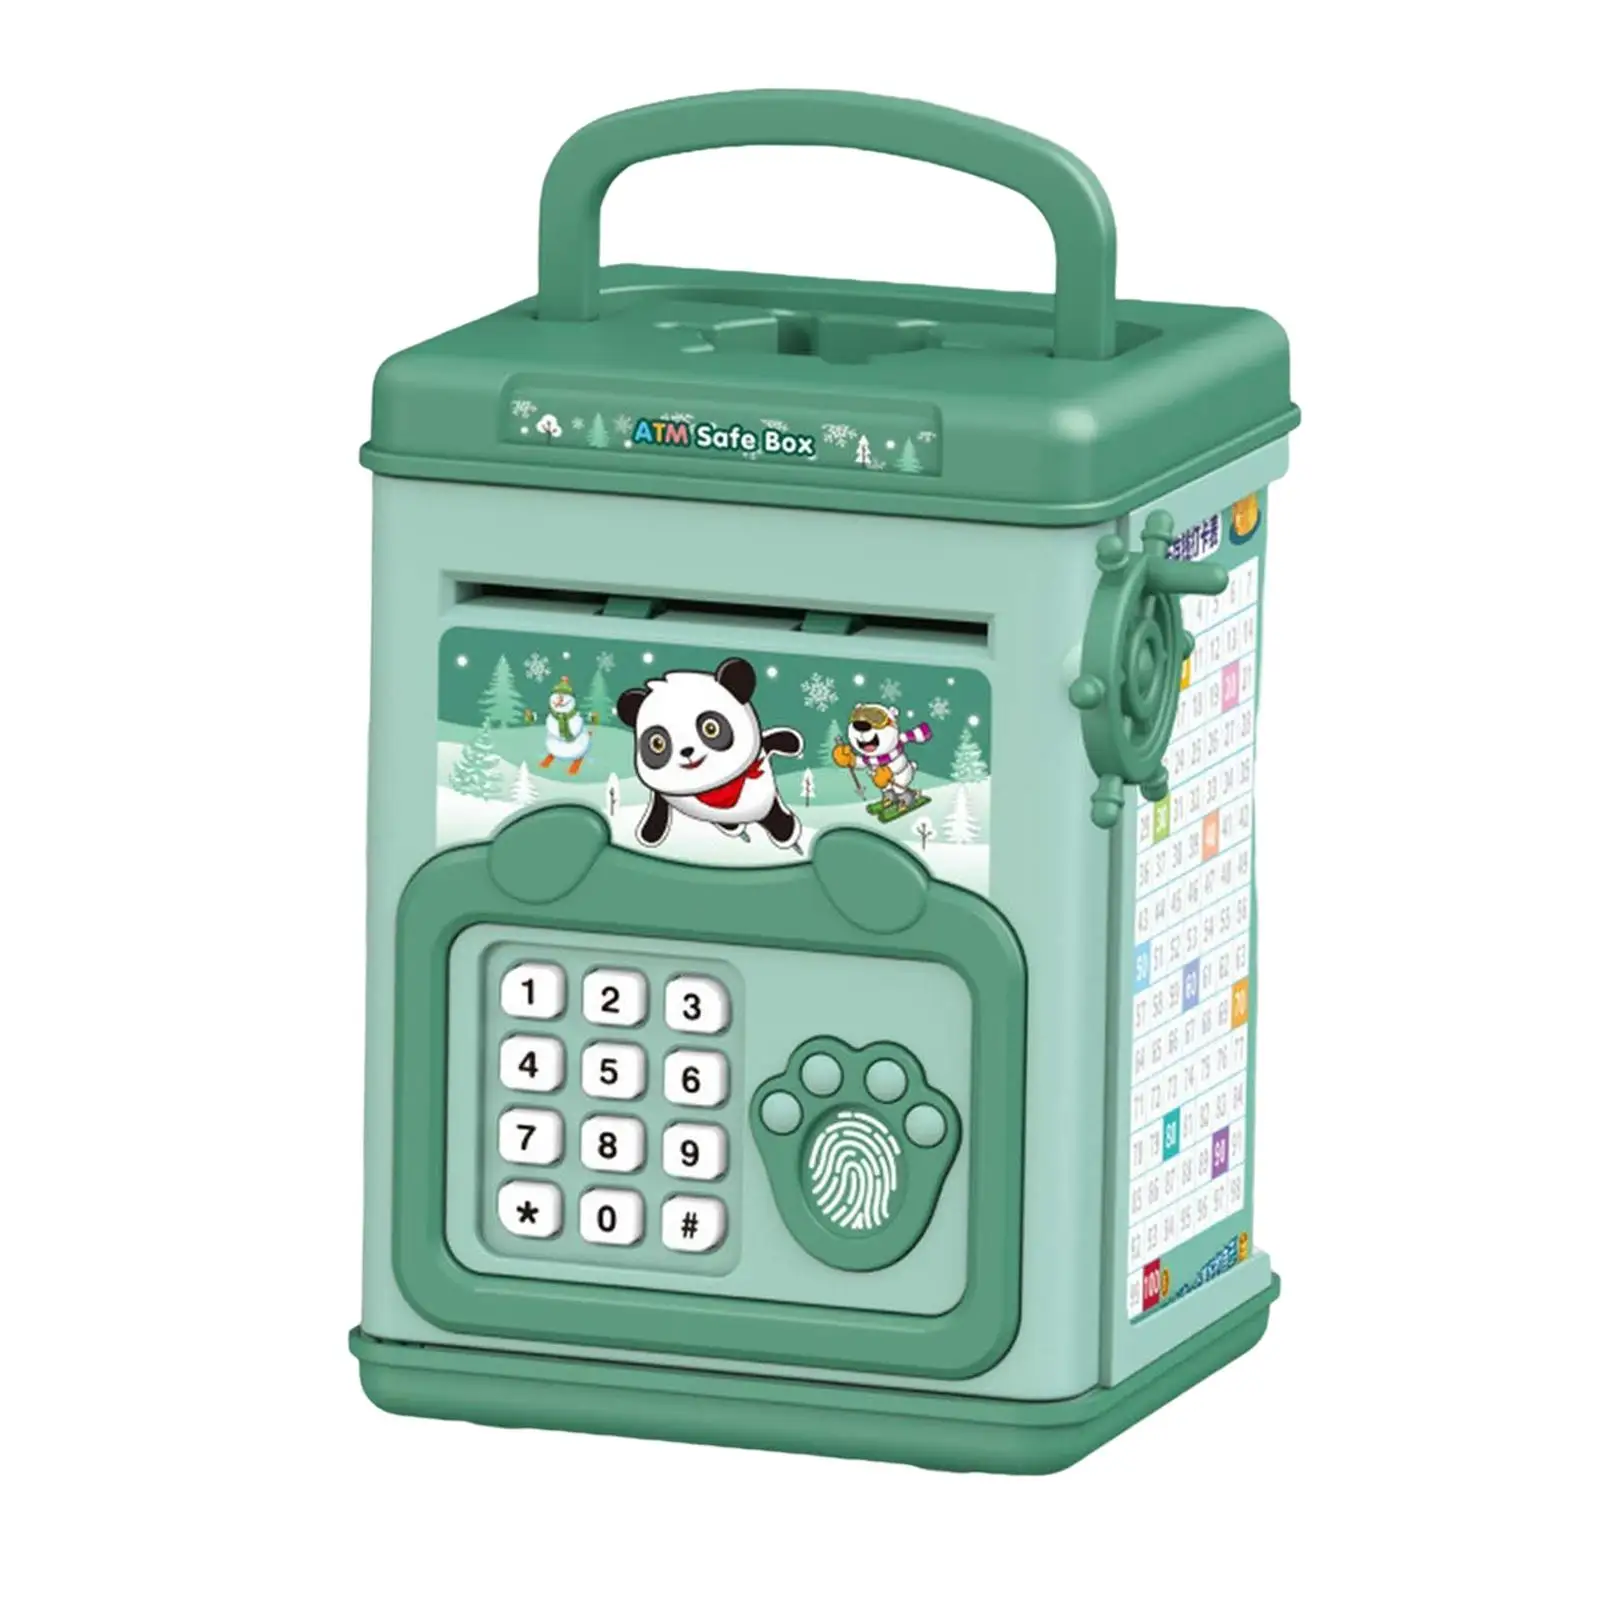 Electronic Piggy Bank Auto Scroll Cash Battery Operated ATM Electronic Money bank Children